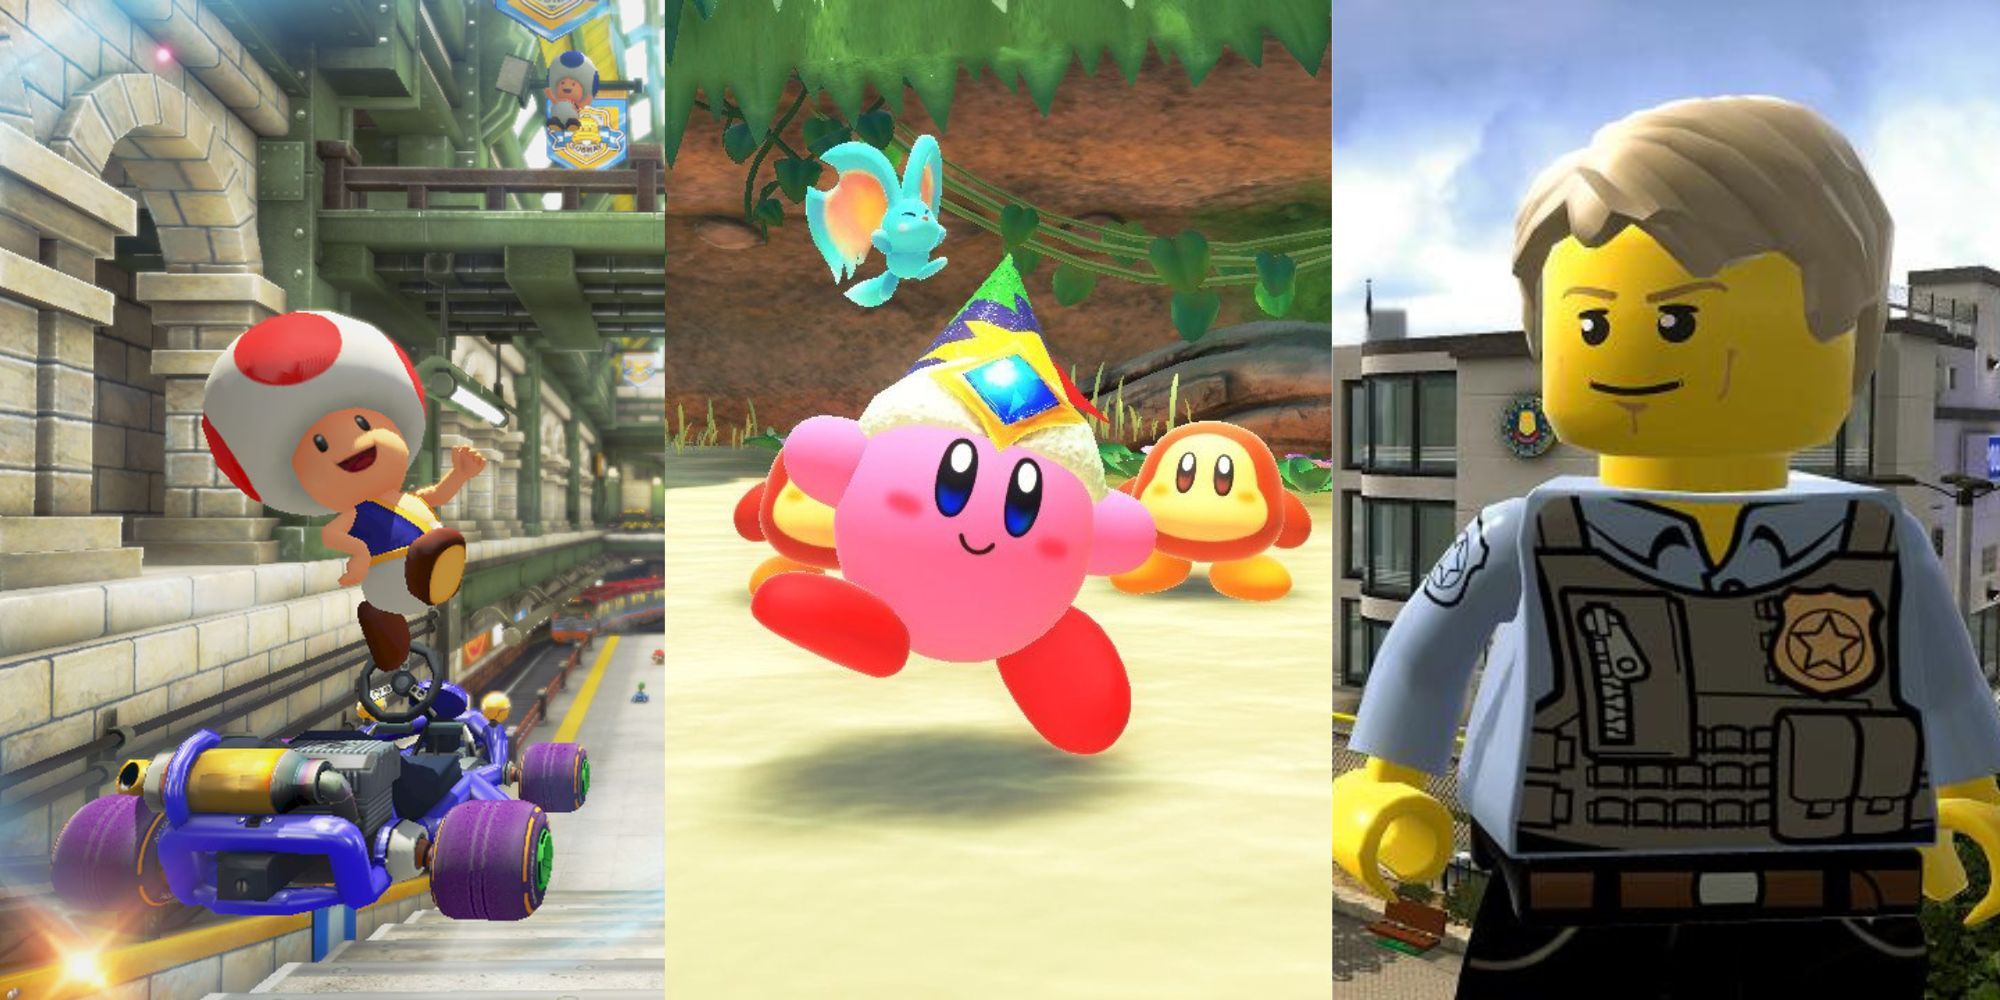 Toad waving on kart from Mario Kart 8, Kirby dancing in front of waddle dees and elfilin, and Chase McCain from Lego City Undercover